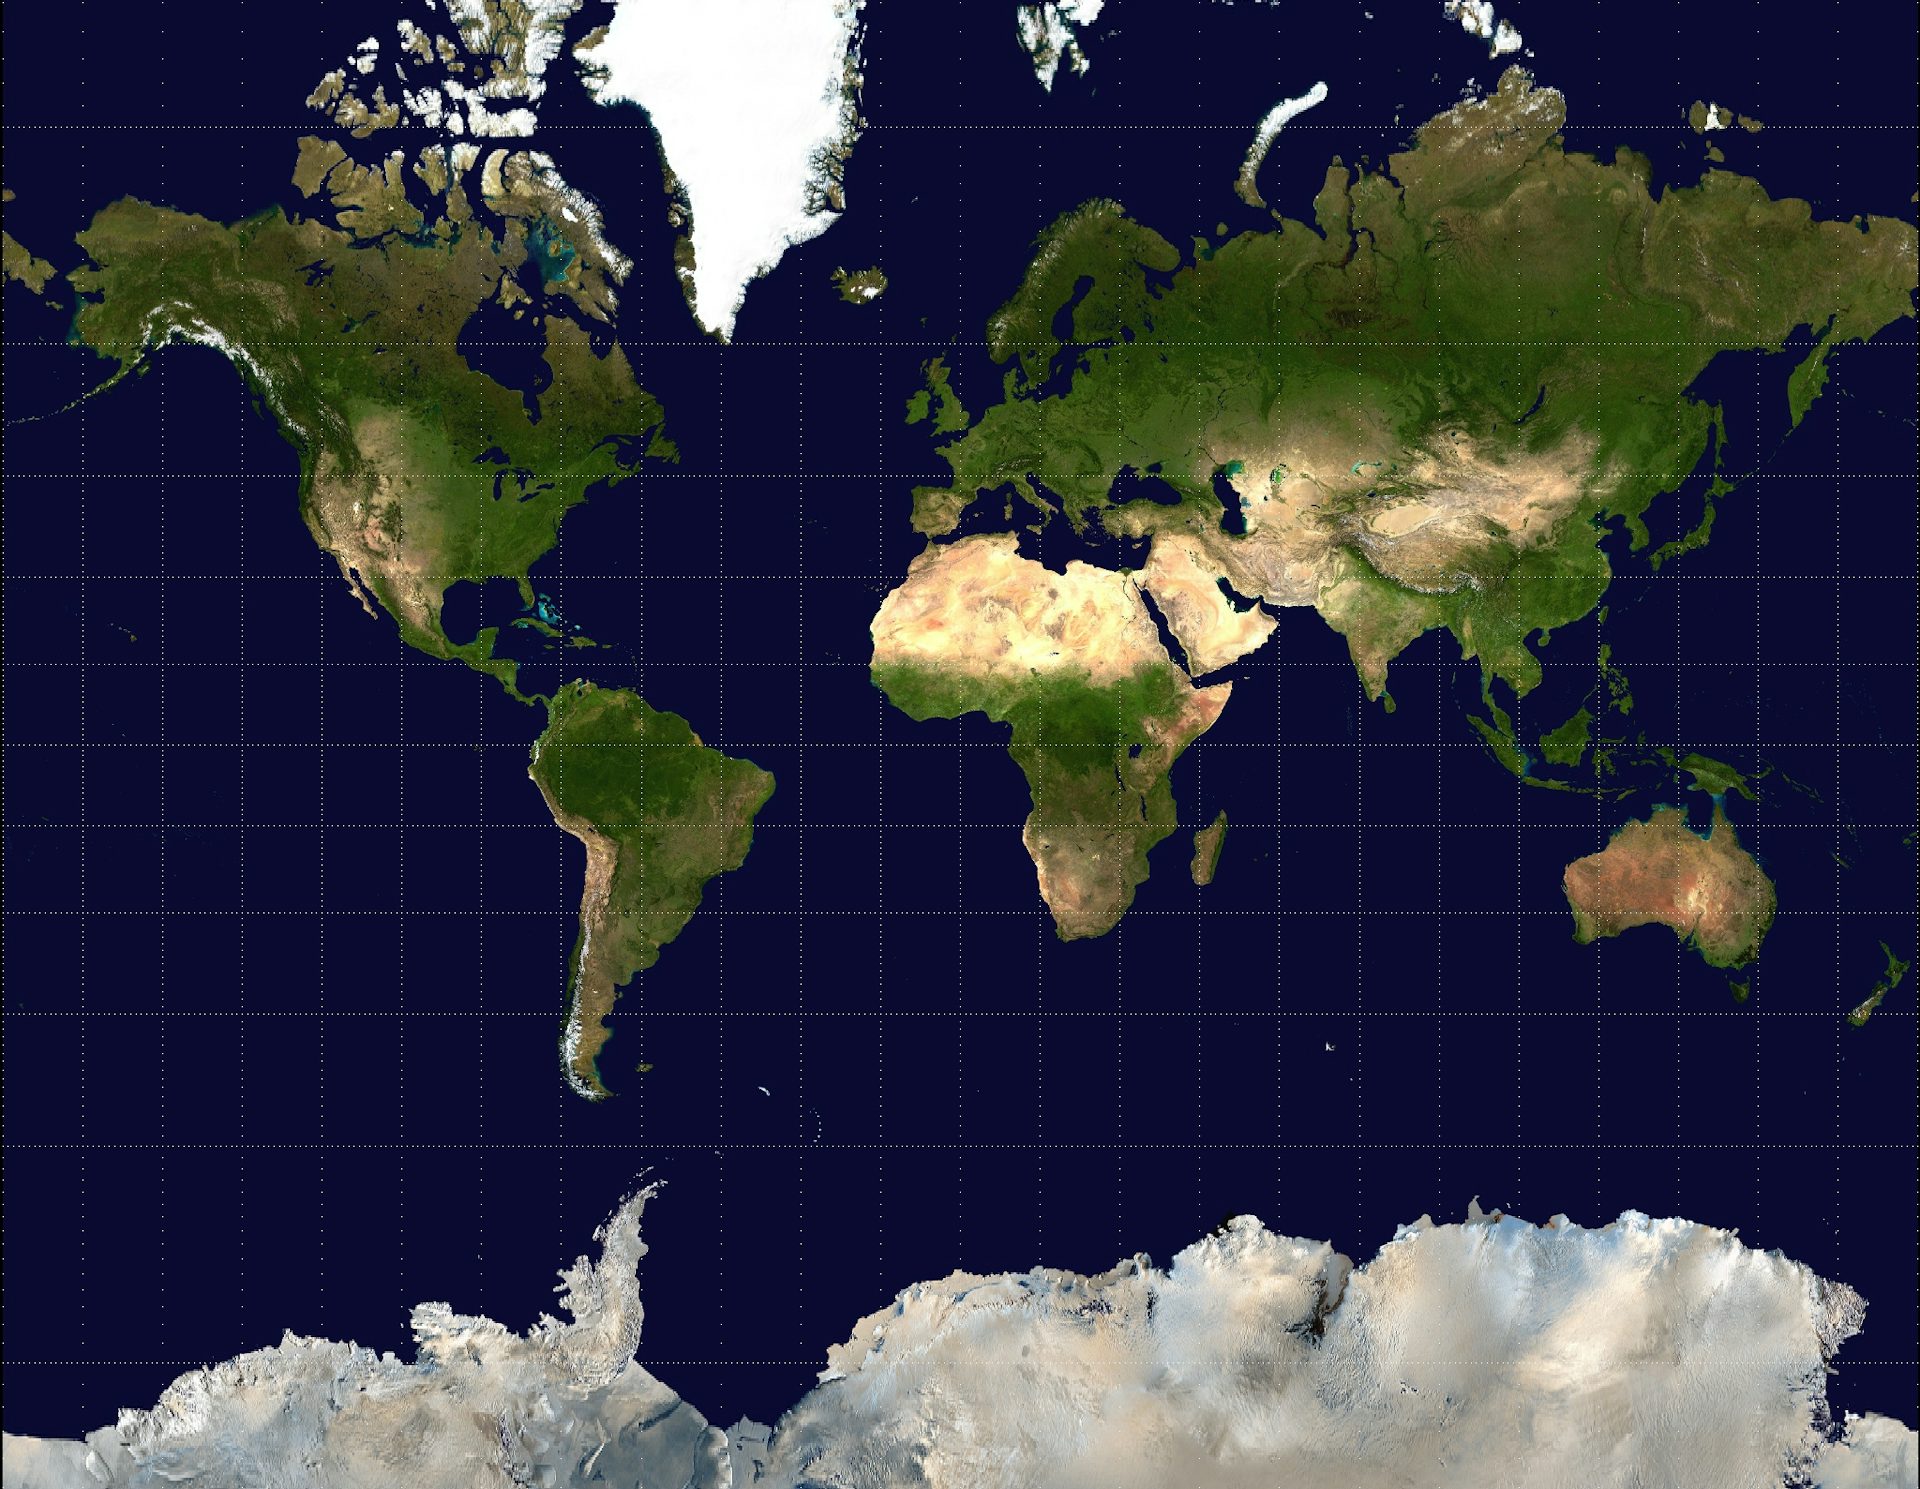 Example of the Mercator Projection